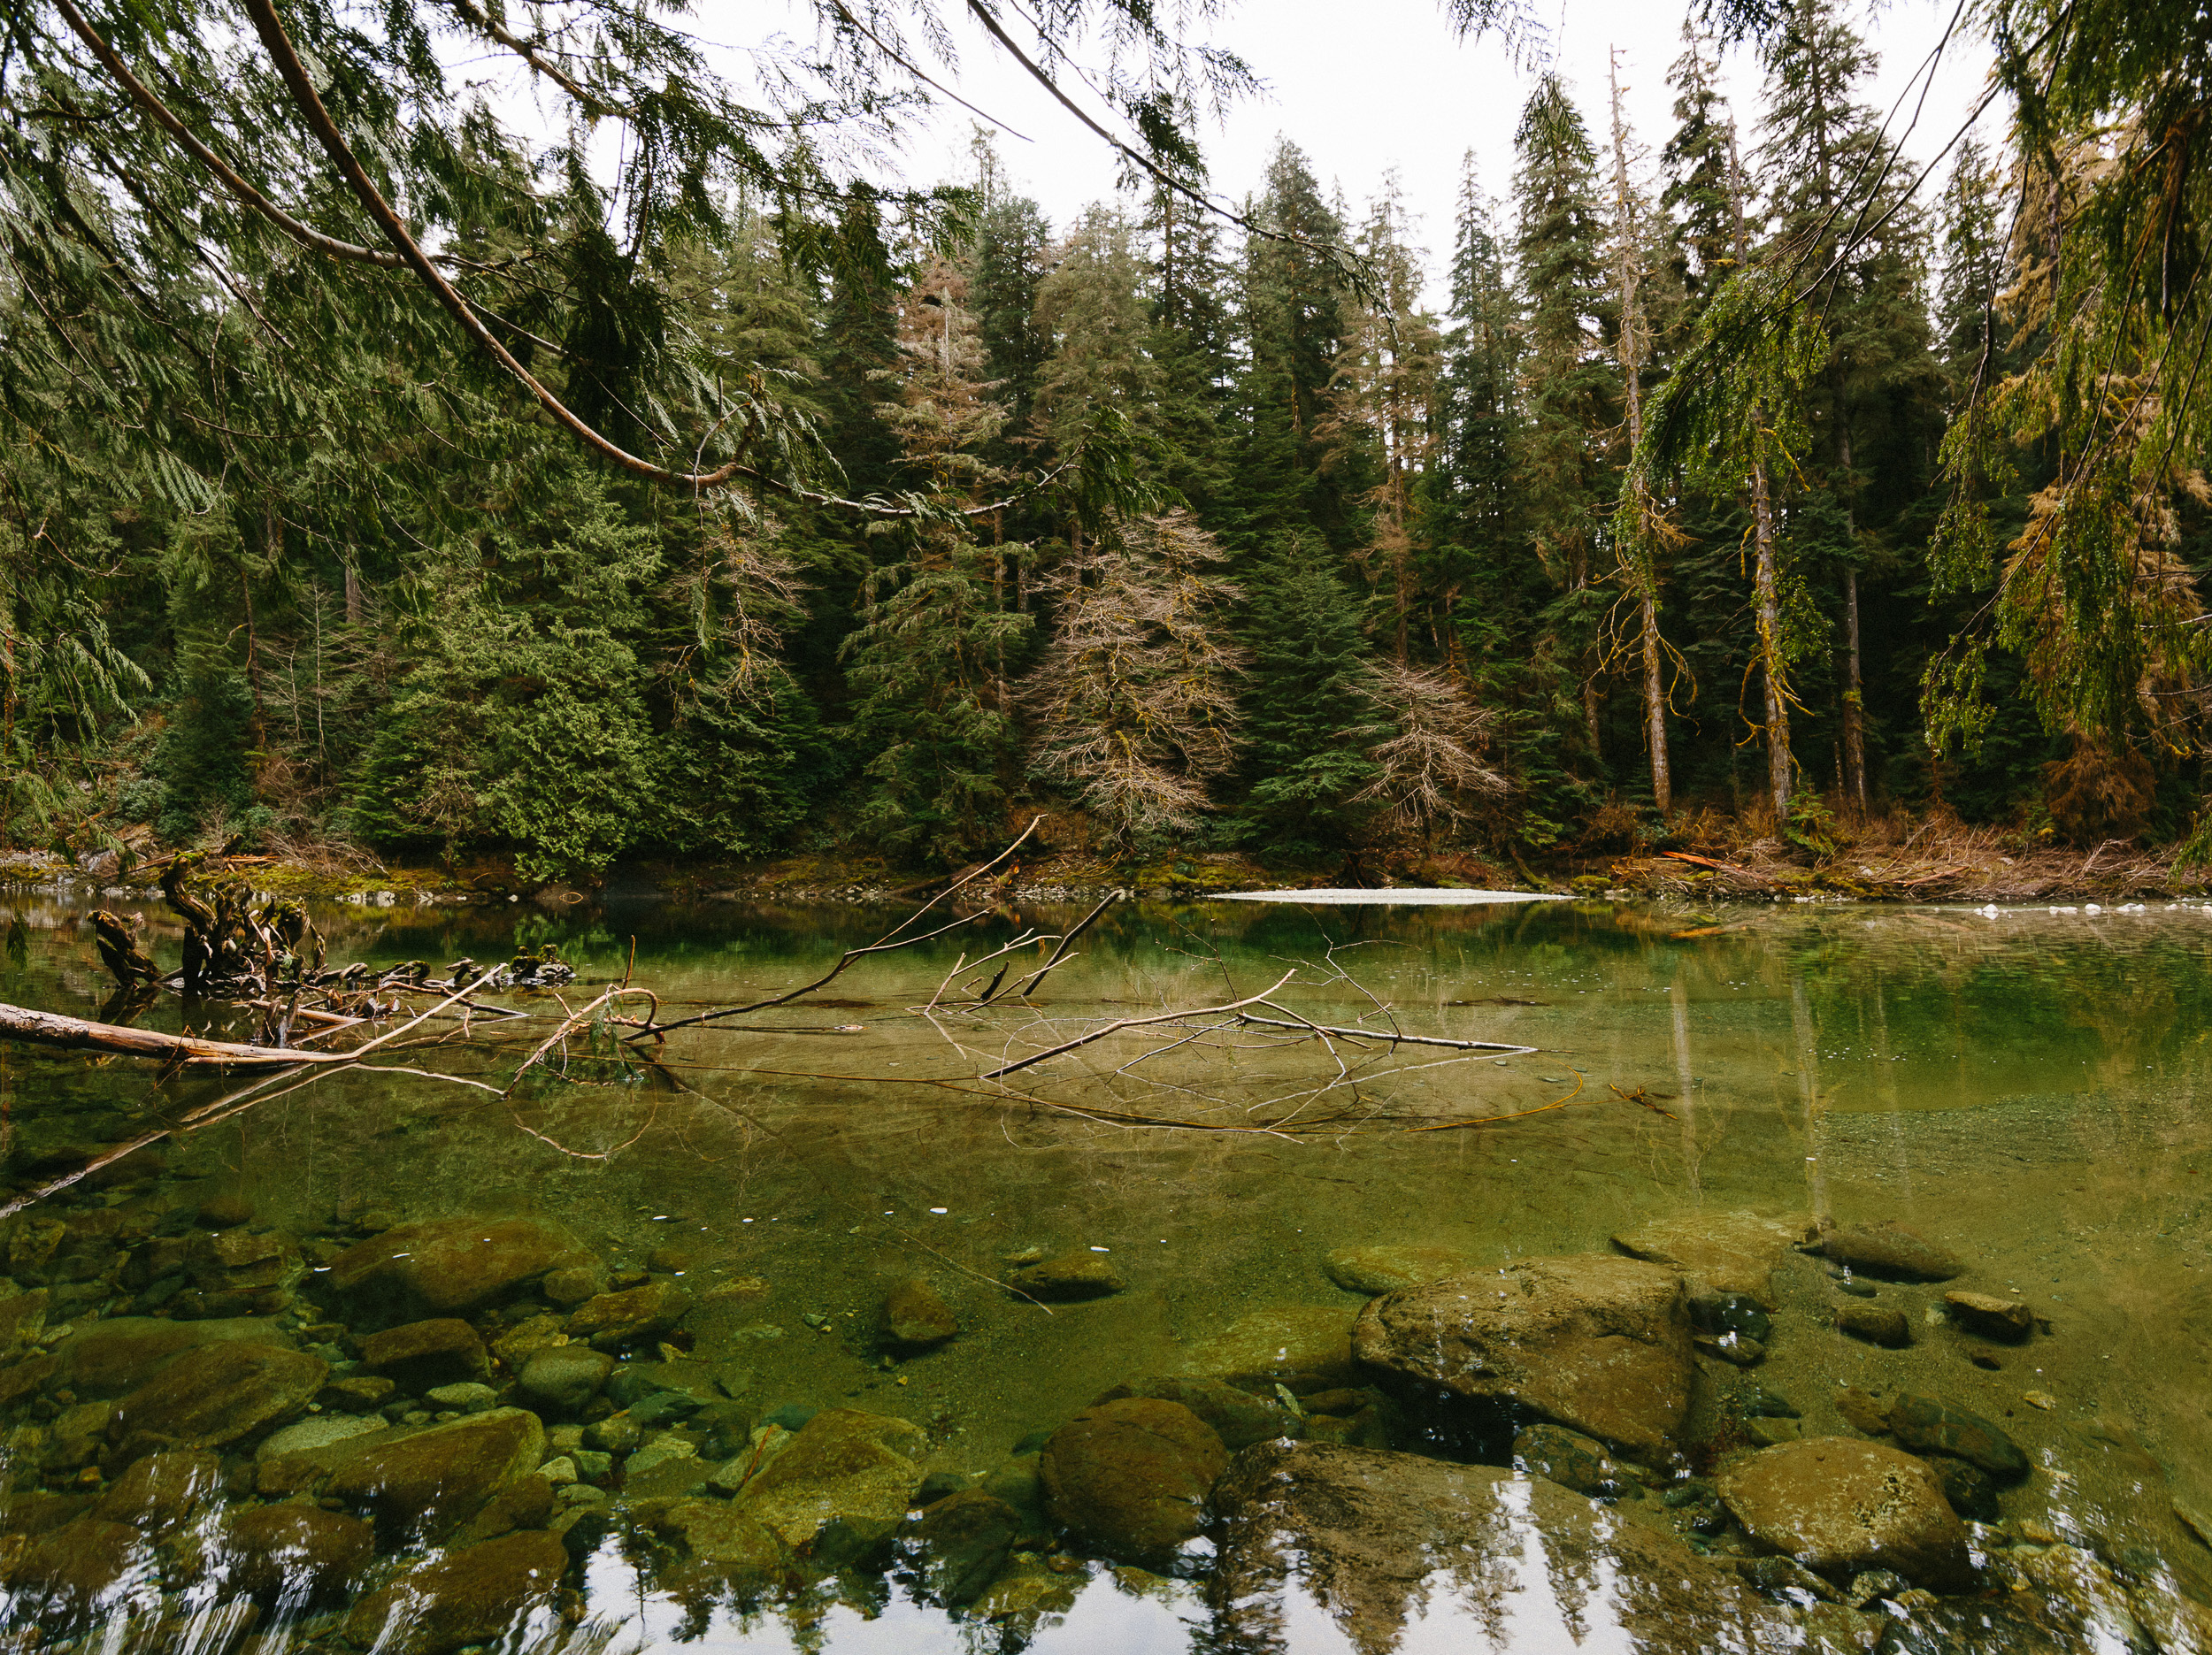 07-Vancouver-Island-BC-Carmanah-Walbran-Valley-Old-Growth-Forest-Emerald-Pool-Giant.jpg